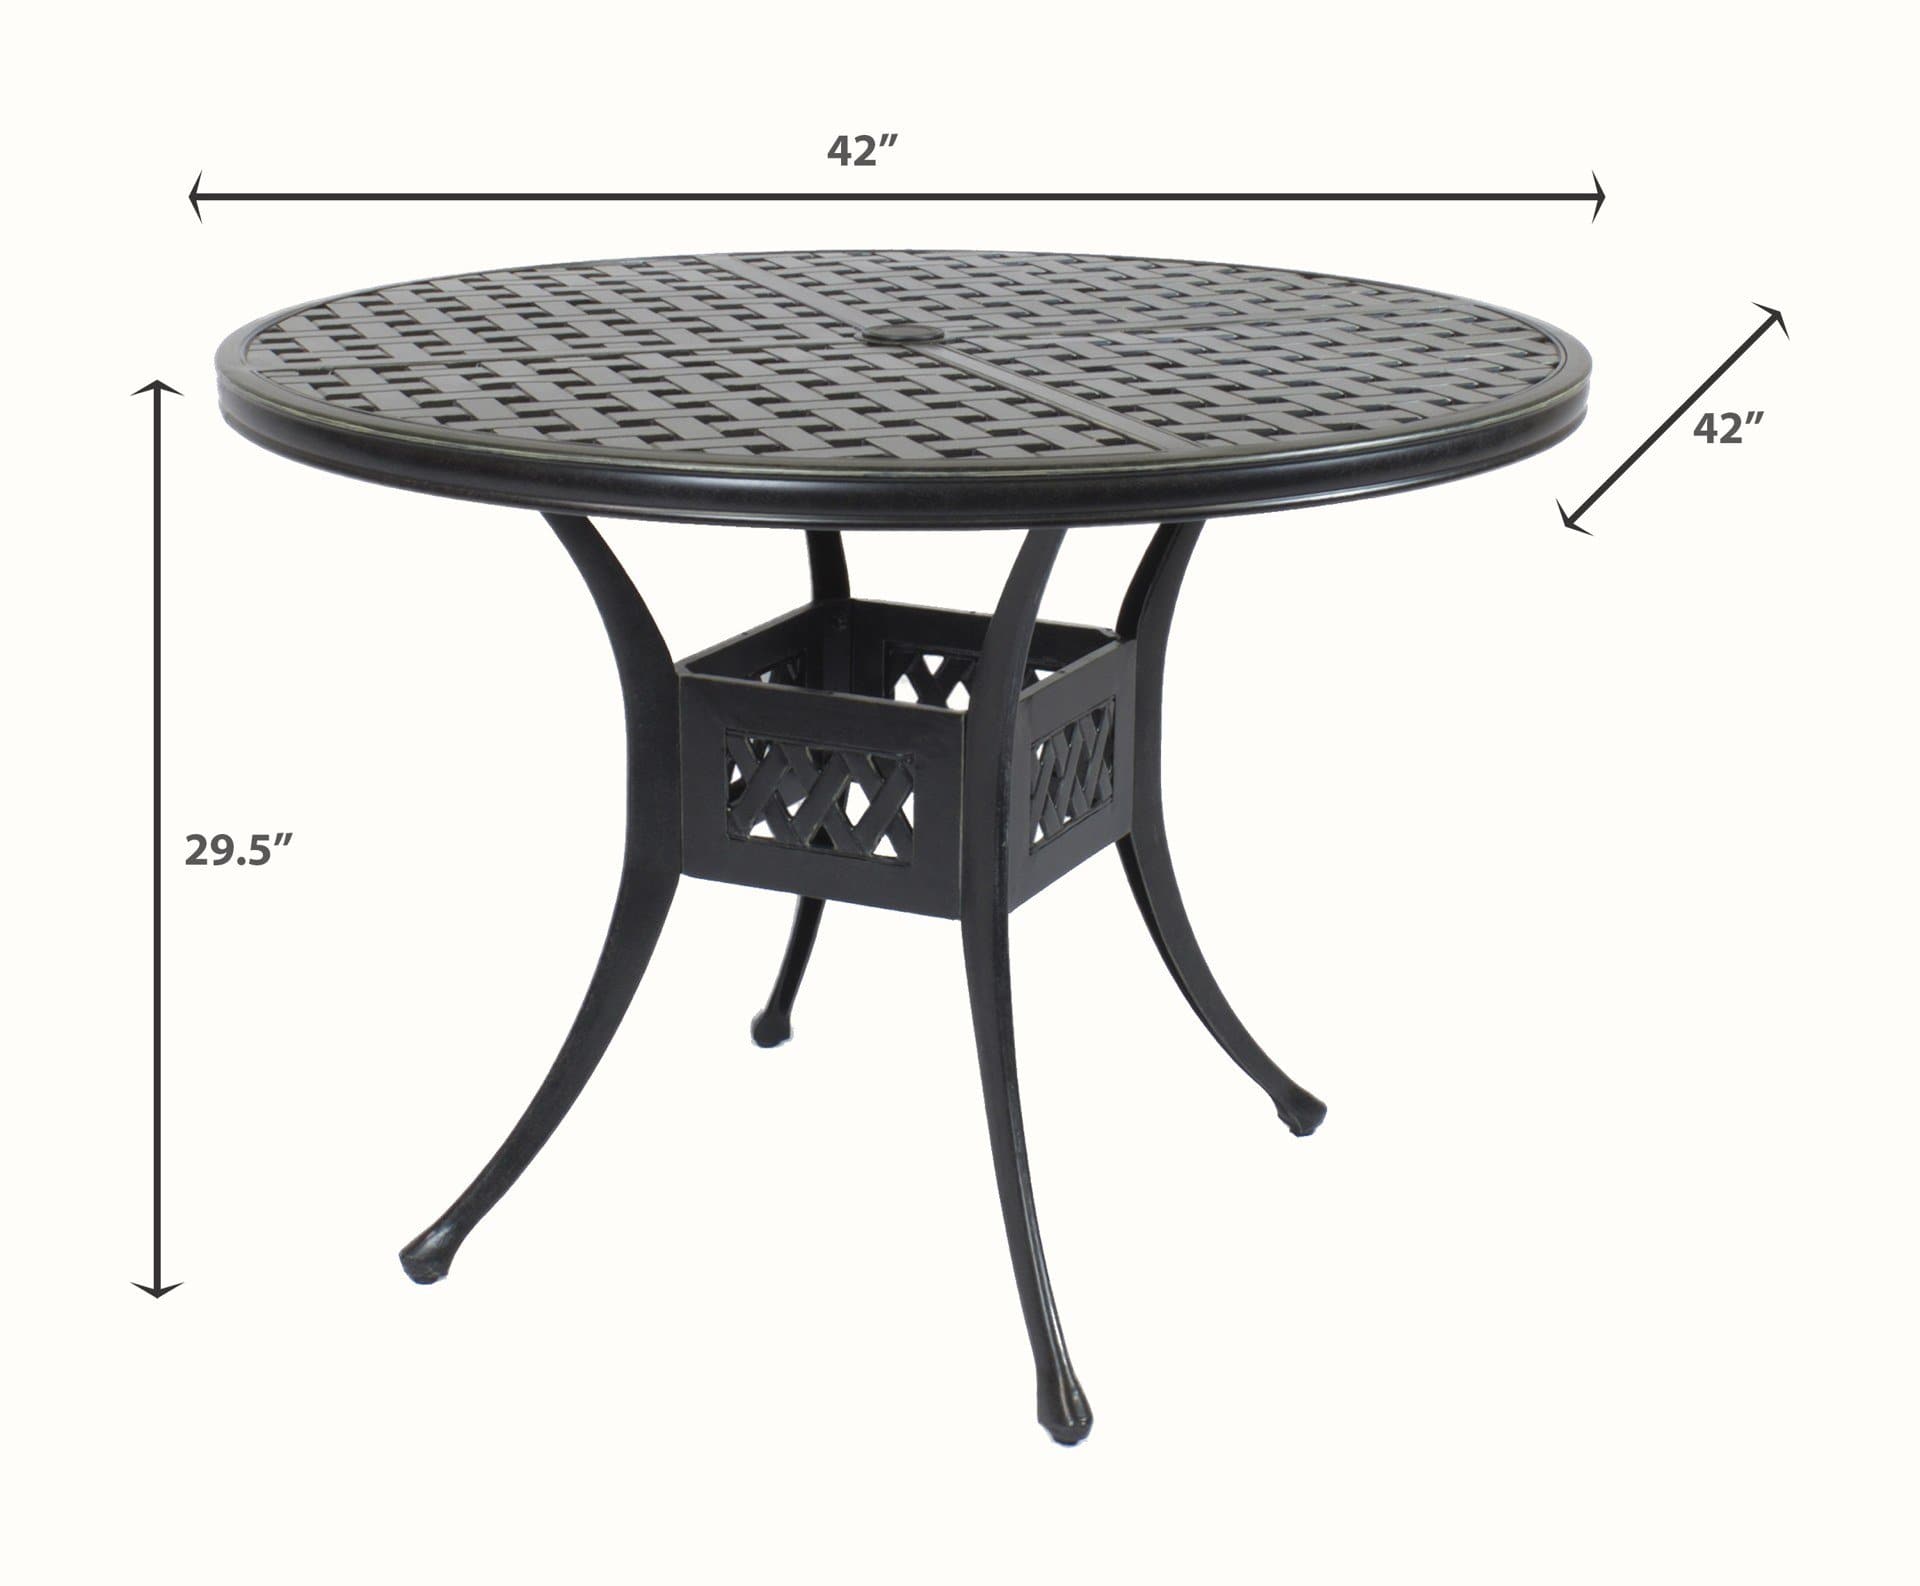 Comfort Care St. Tropez Outdoor Patio Dining Tables - Senior.com Dining Tables